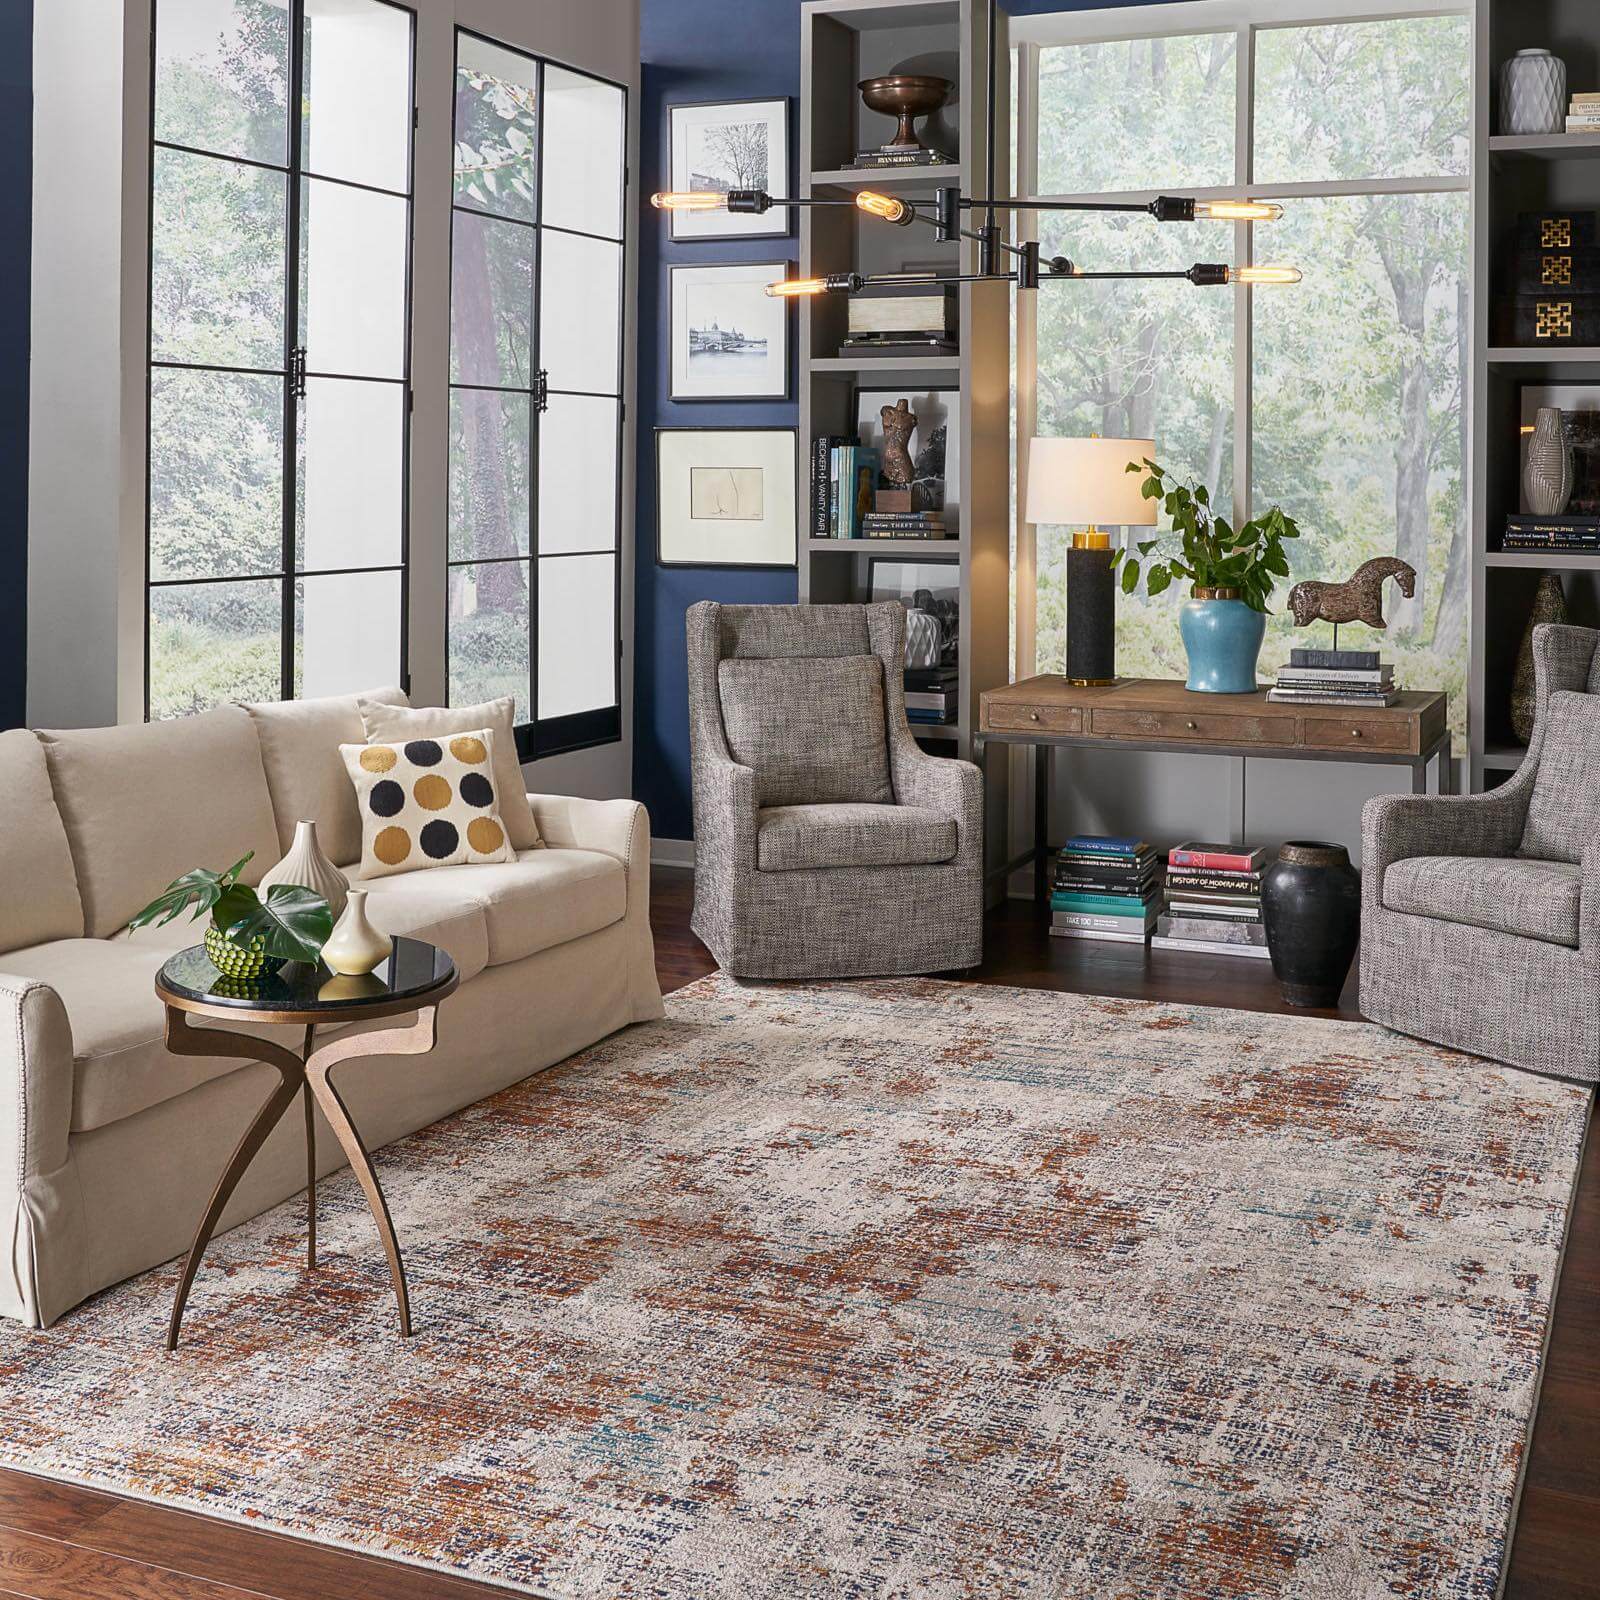 Area Rug in Living Room | Rockwall Floor and Paint